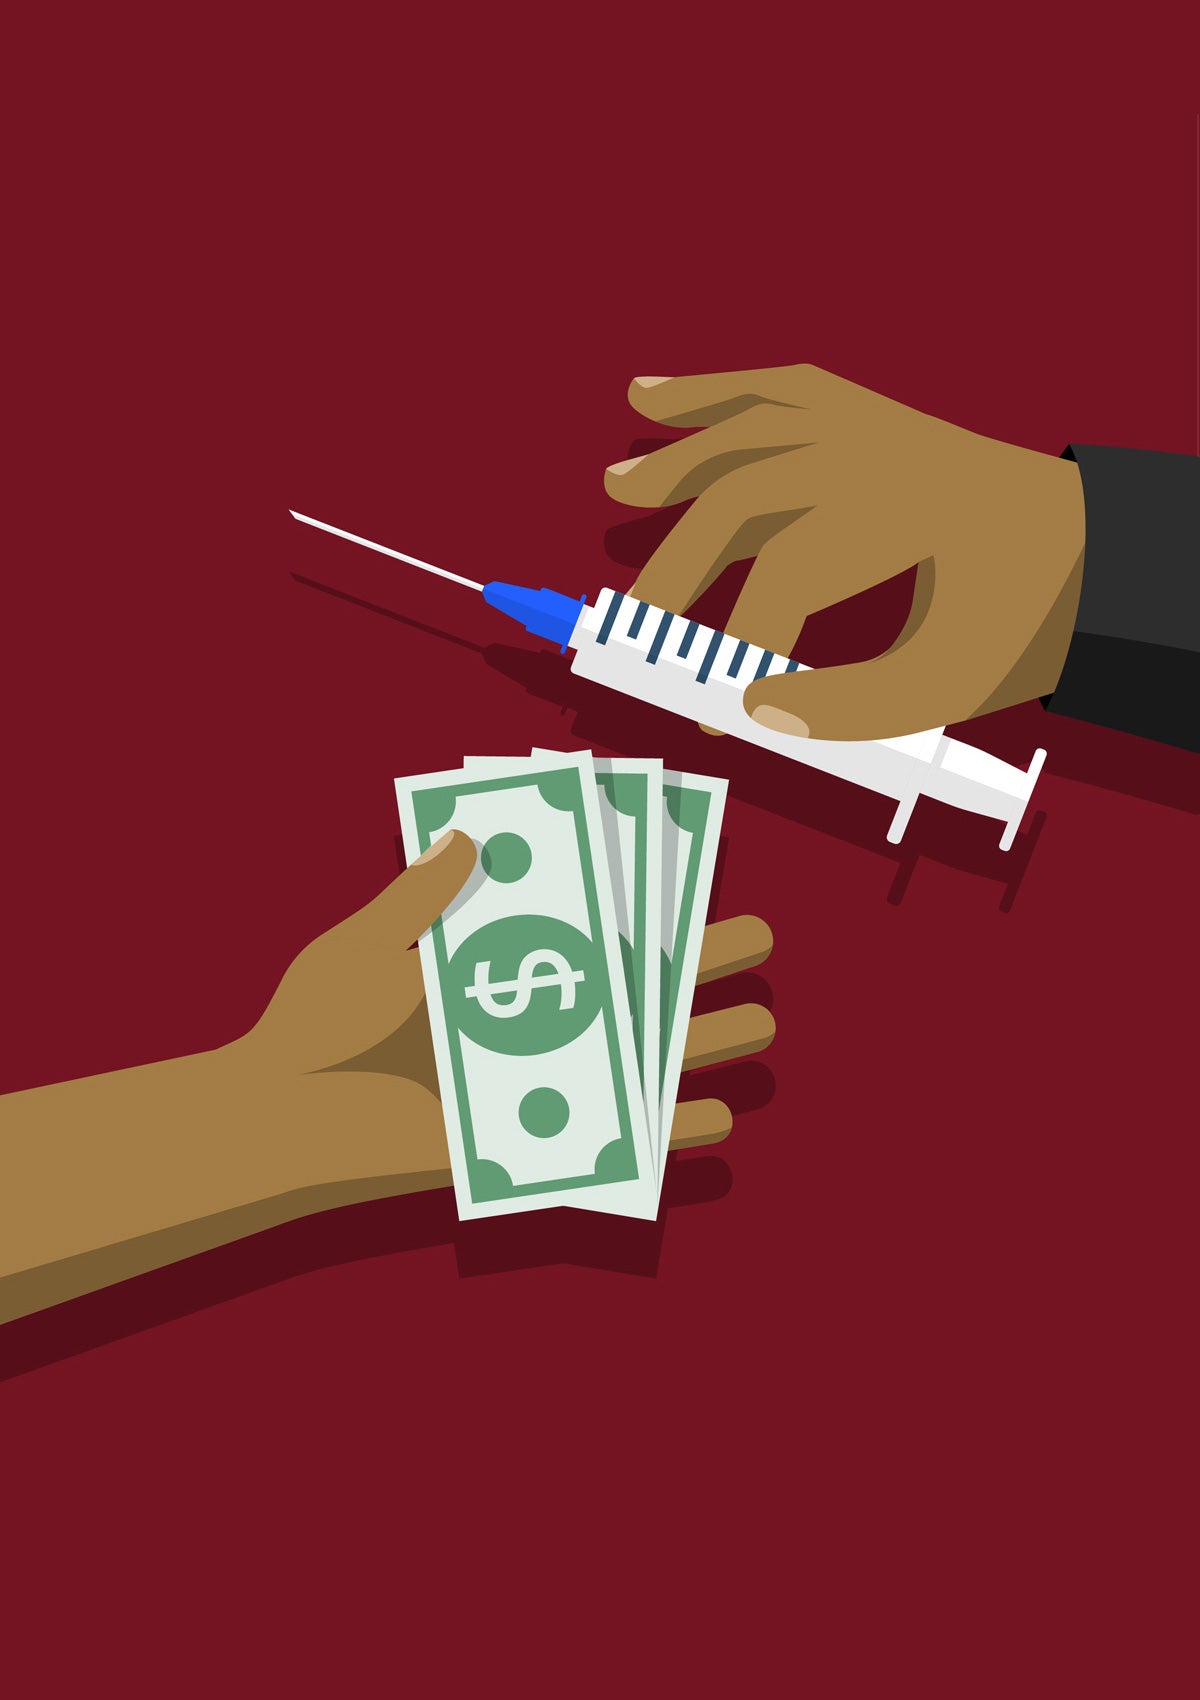 Illustration: Two tan hands reach toward each other. The one on the right holds a syringe. The one on the left holds a stack of US dollars. The background is a deep red.